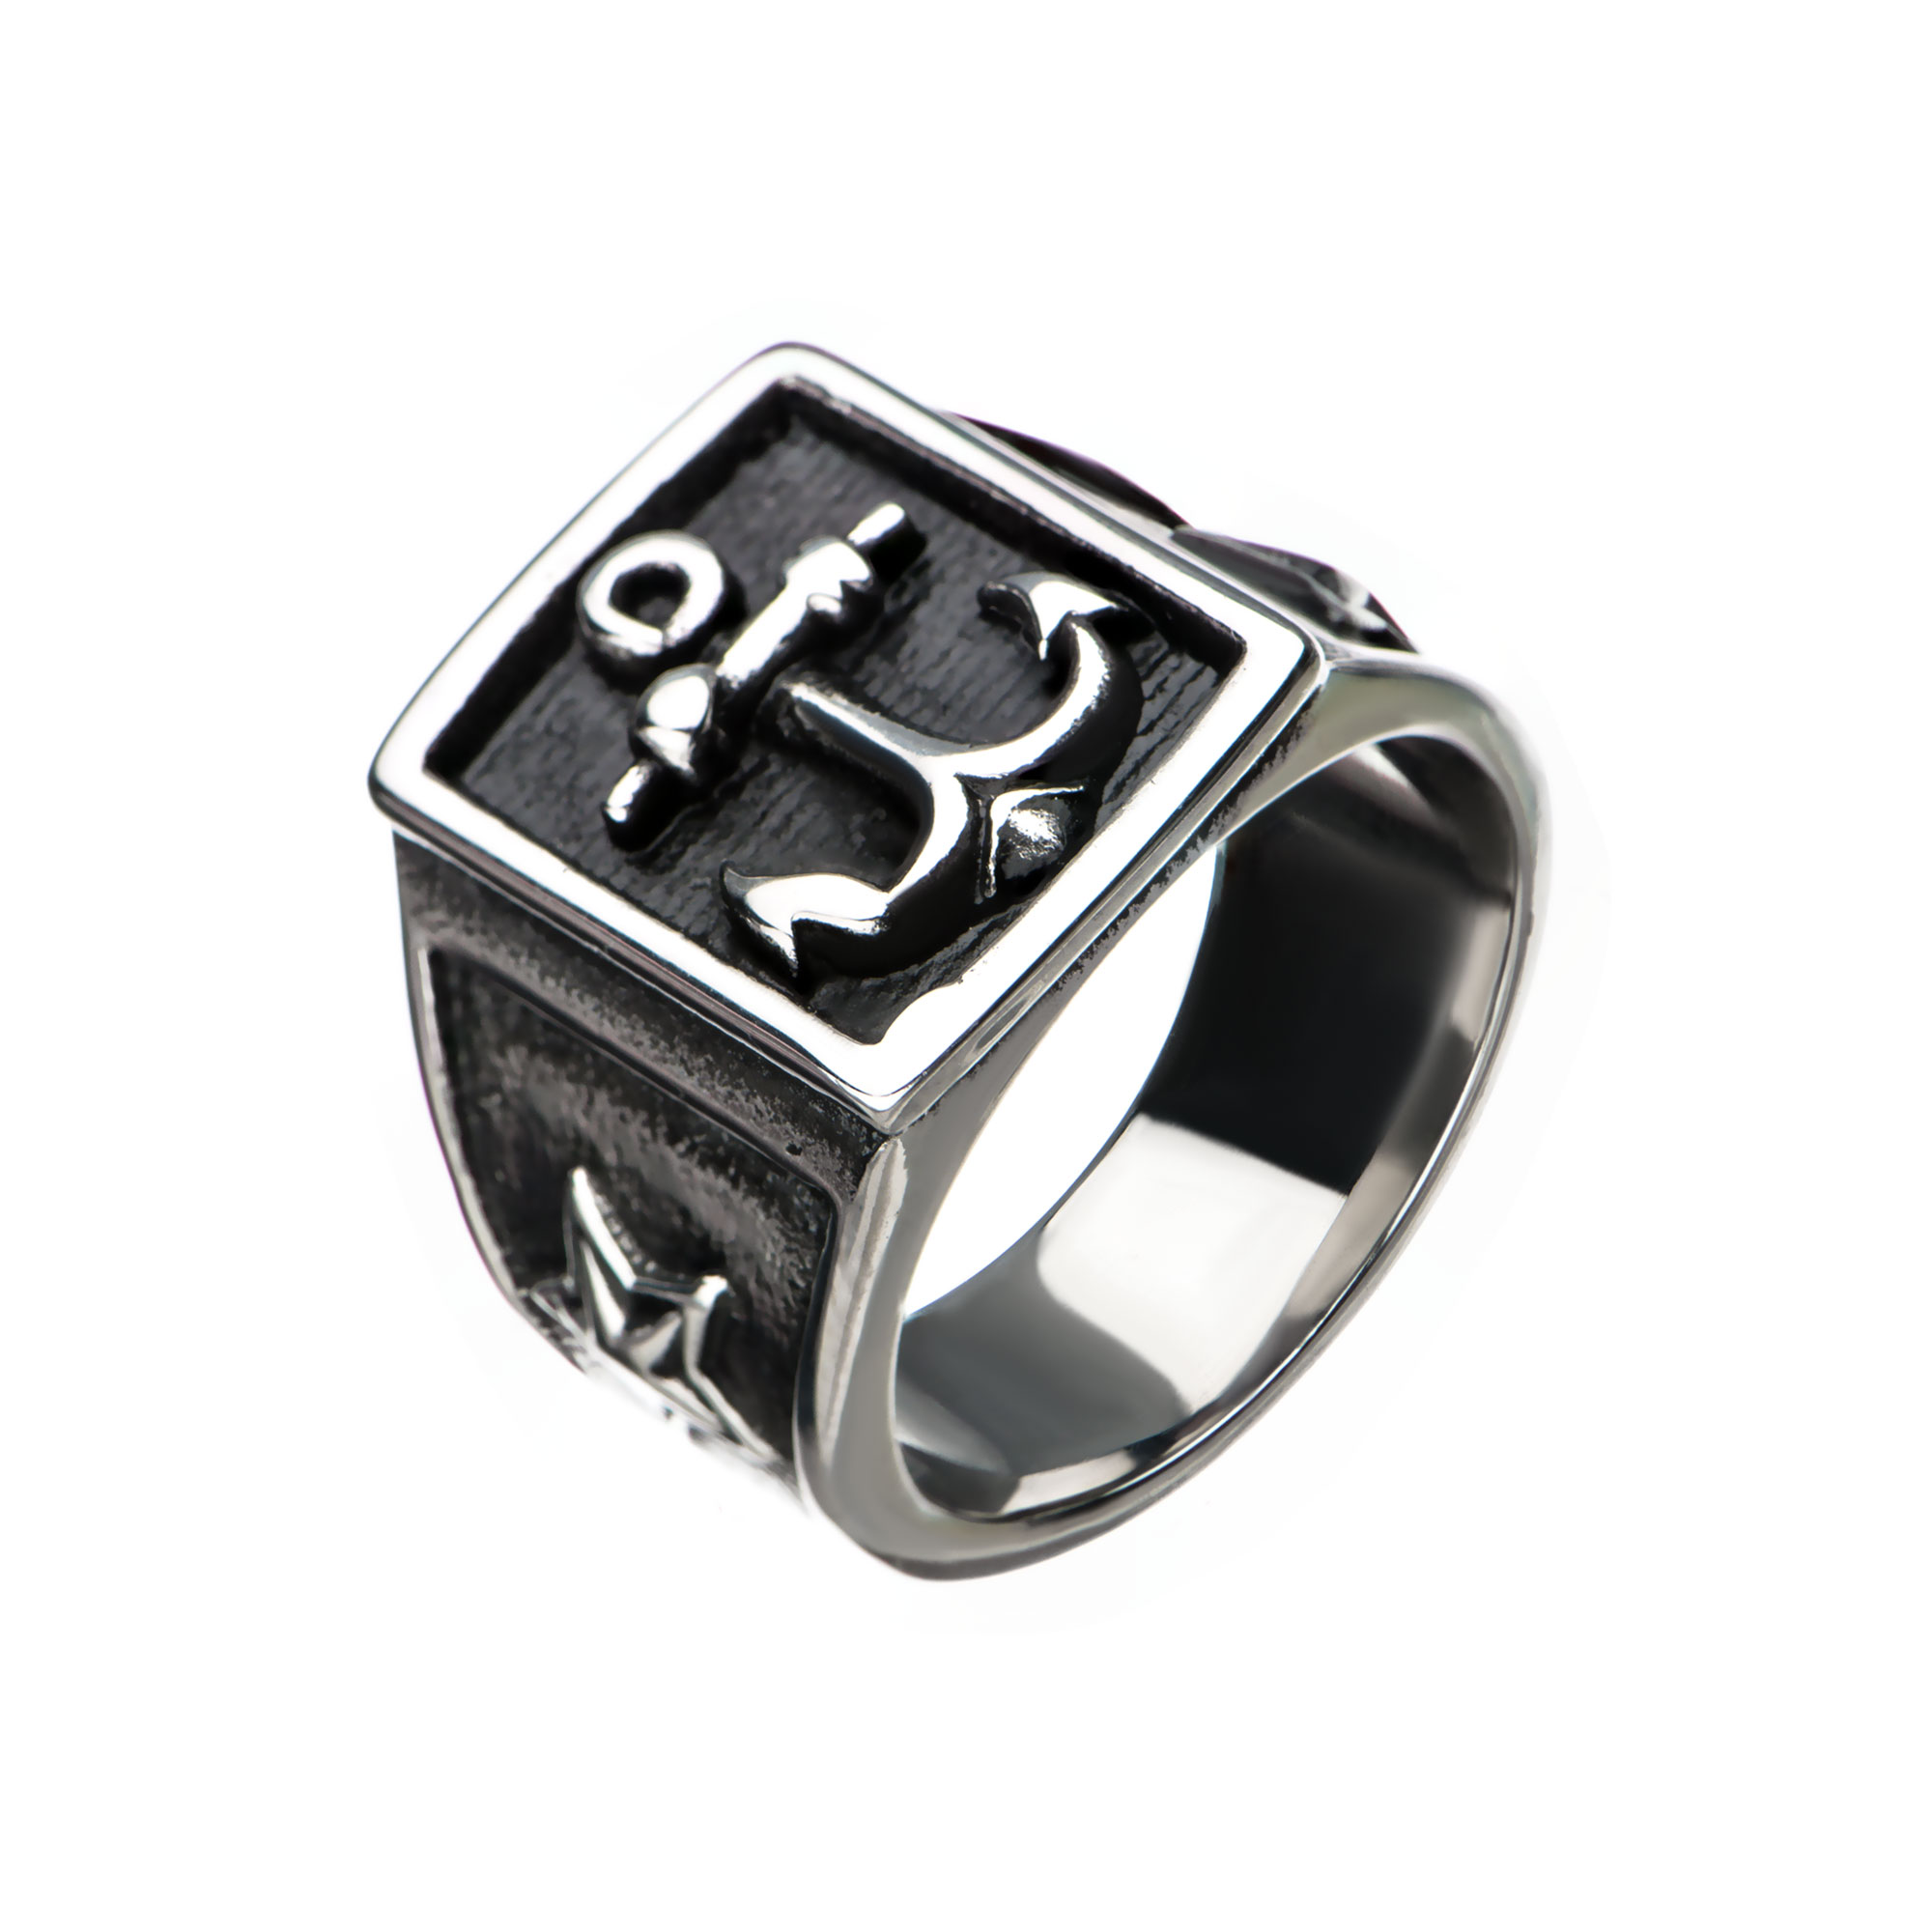 Steel & Black Plated Oxidized Anchor Signet Ring Lewis Jewelers, Inc. Ansonia, CT